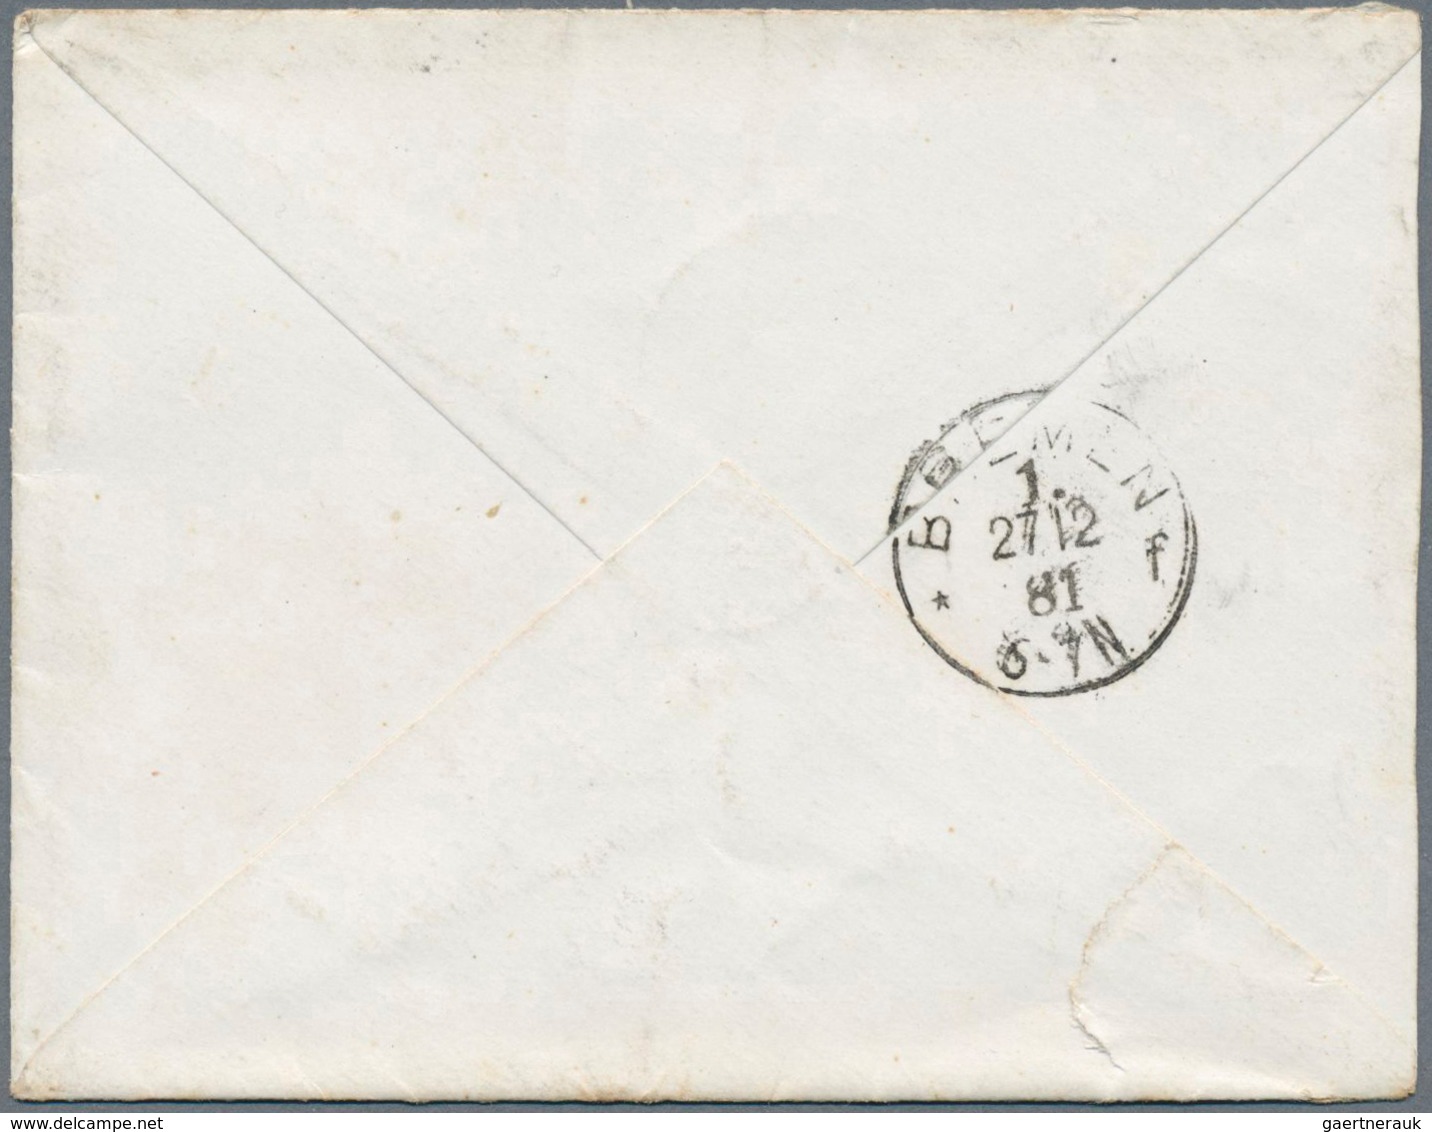 Singapur: 1881 Cover From Singapore To Bremen, Germany 'via Naples' Franked By 1867 8c. Orange With - Singapour (...-1959)